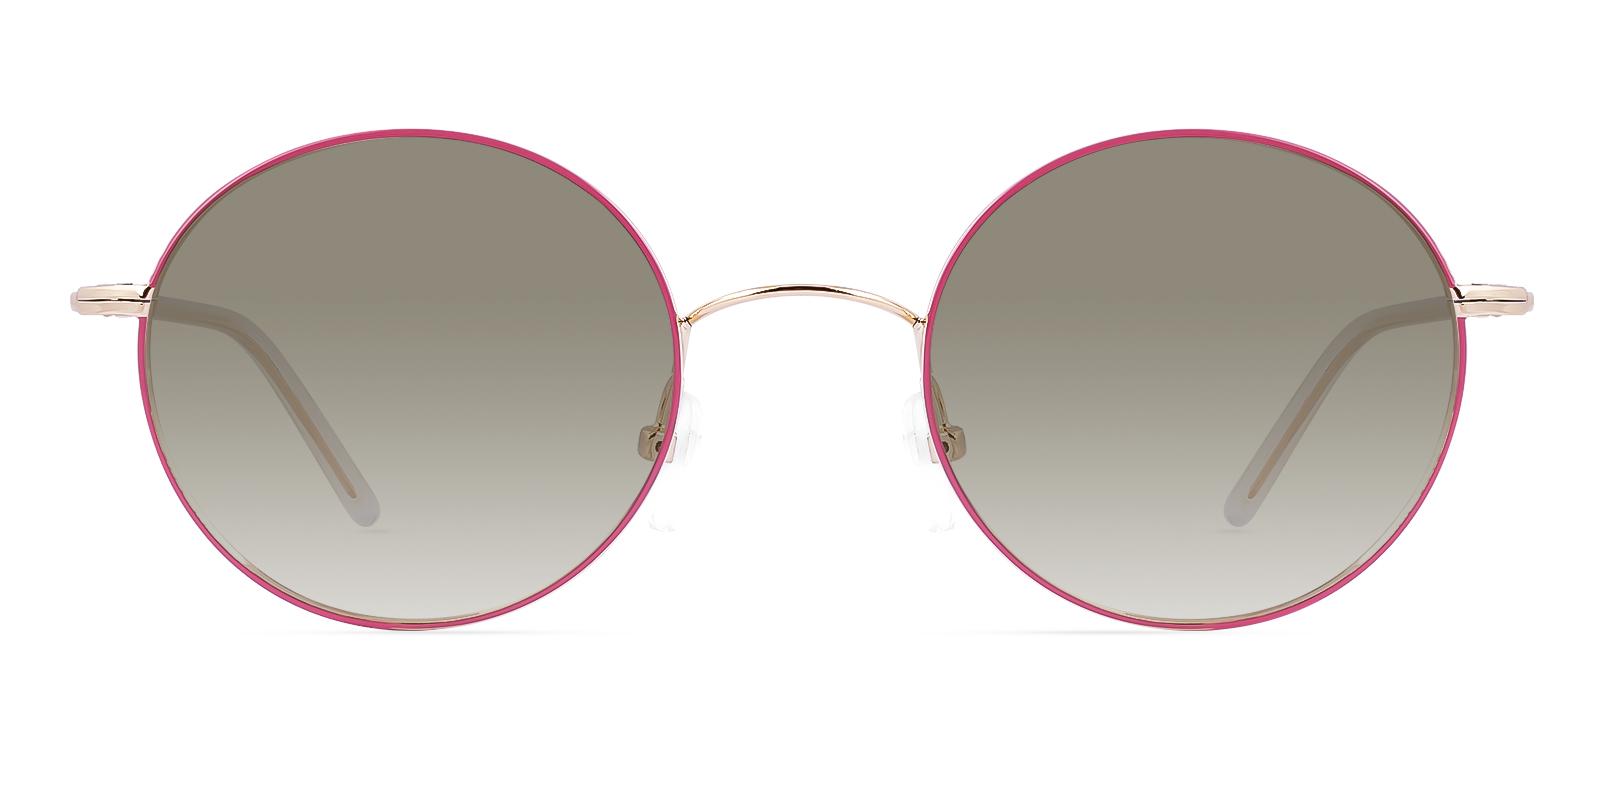 Afteret Pink Metal Lightweight , NosePads , Sunglasses Frames from ABBE Glasses